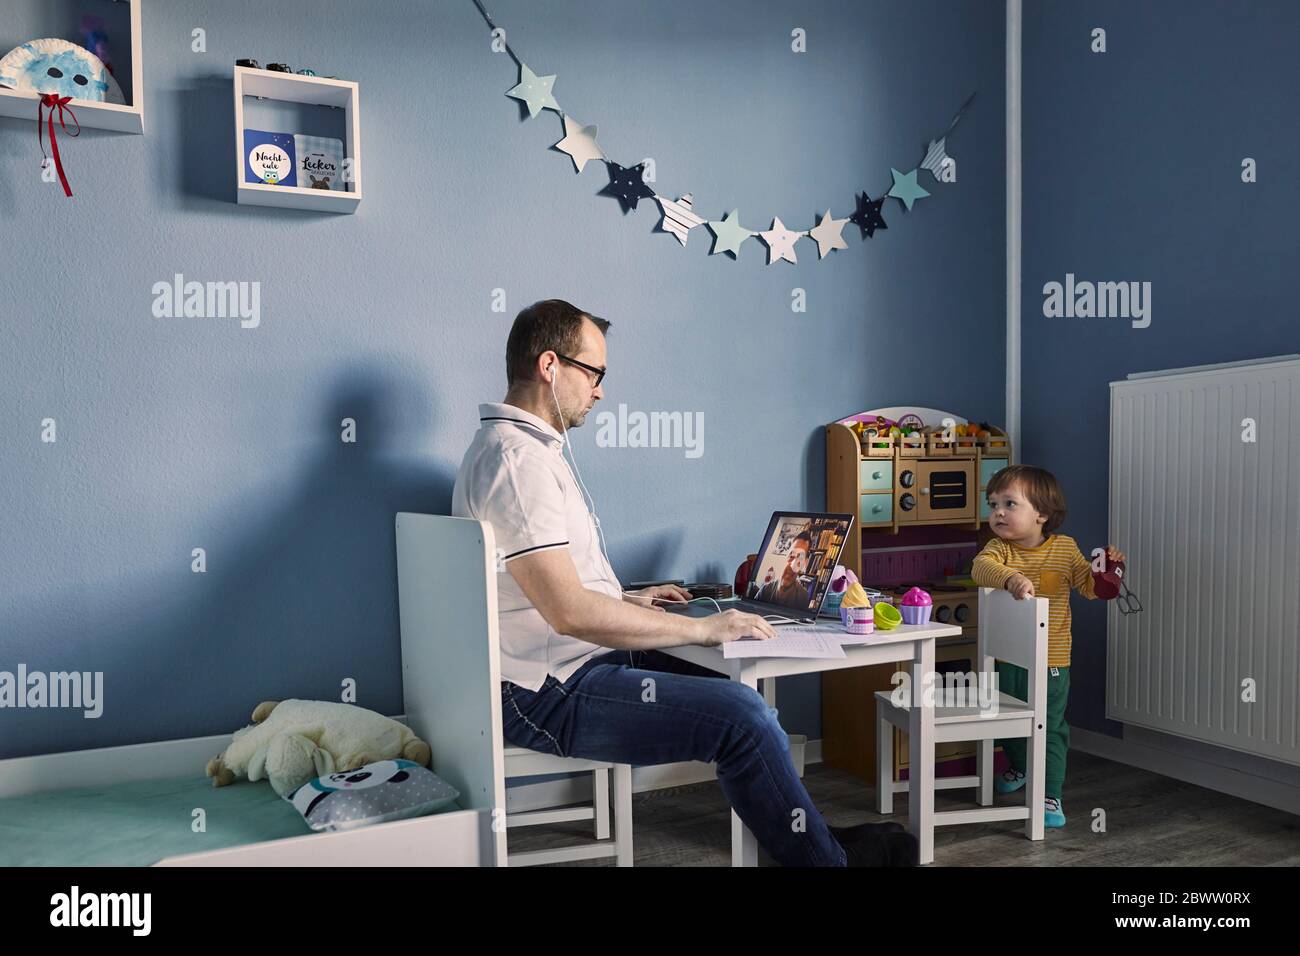 Man working and using laptop in children's room with simultaneous childcare Stock Photo